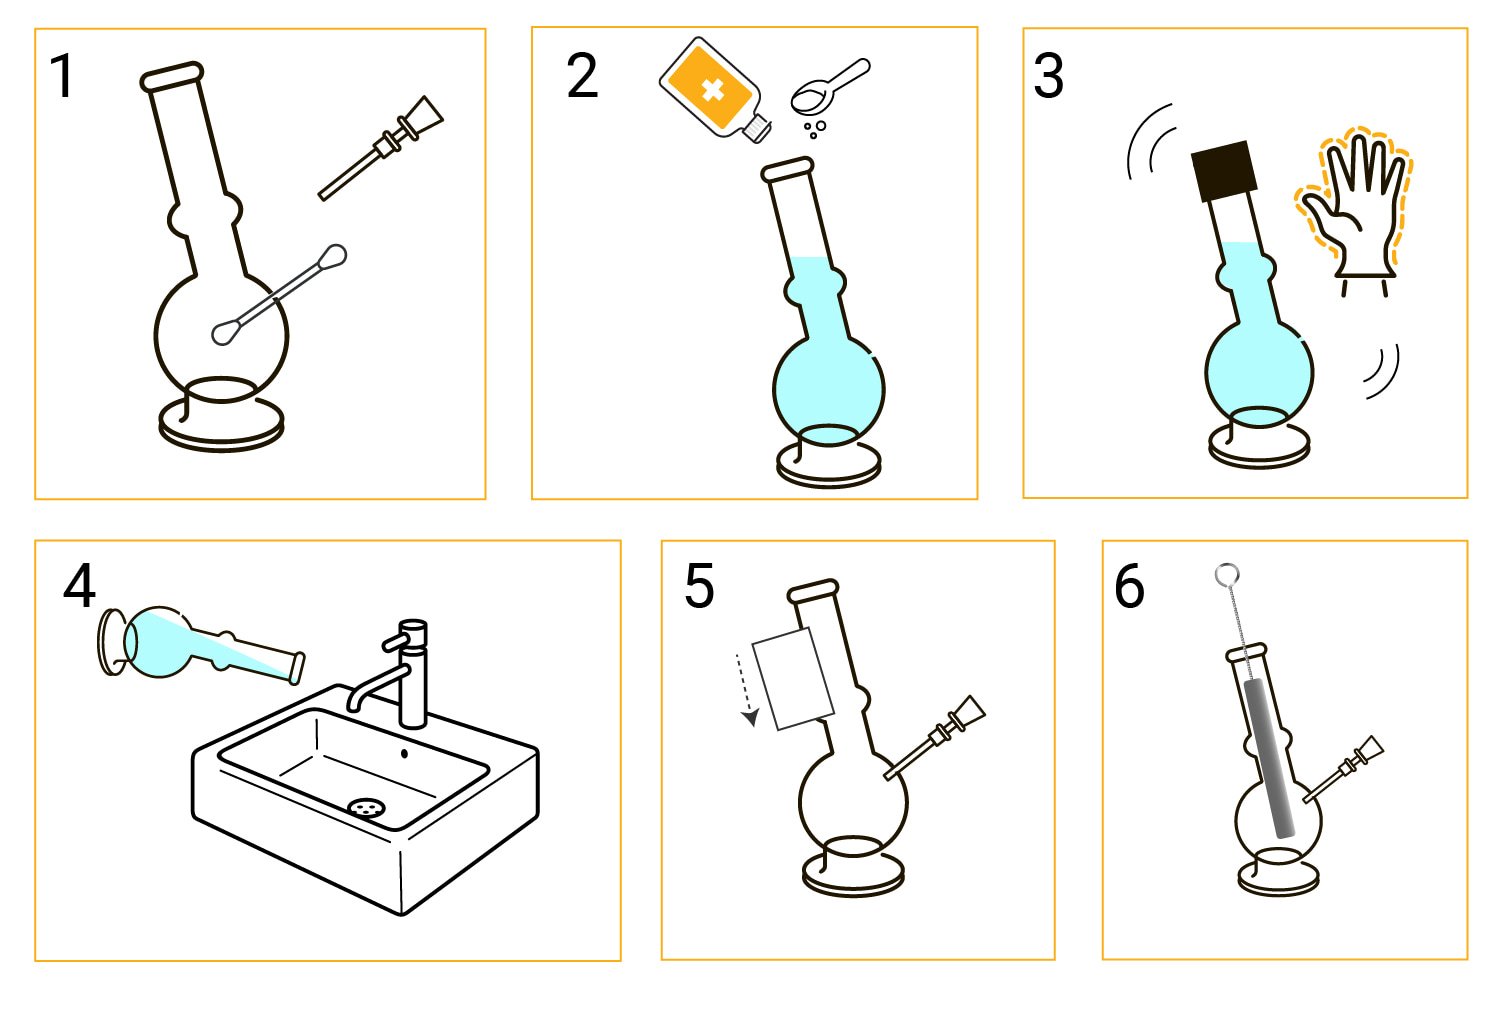 How to Properly Clean Any Type of Bong